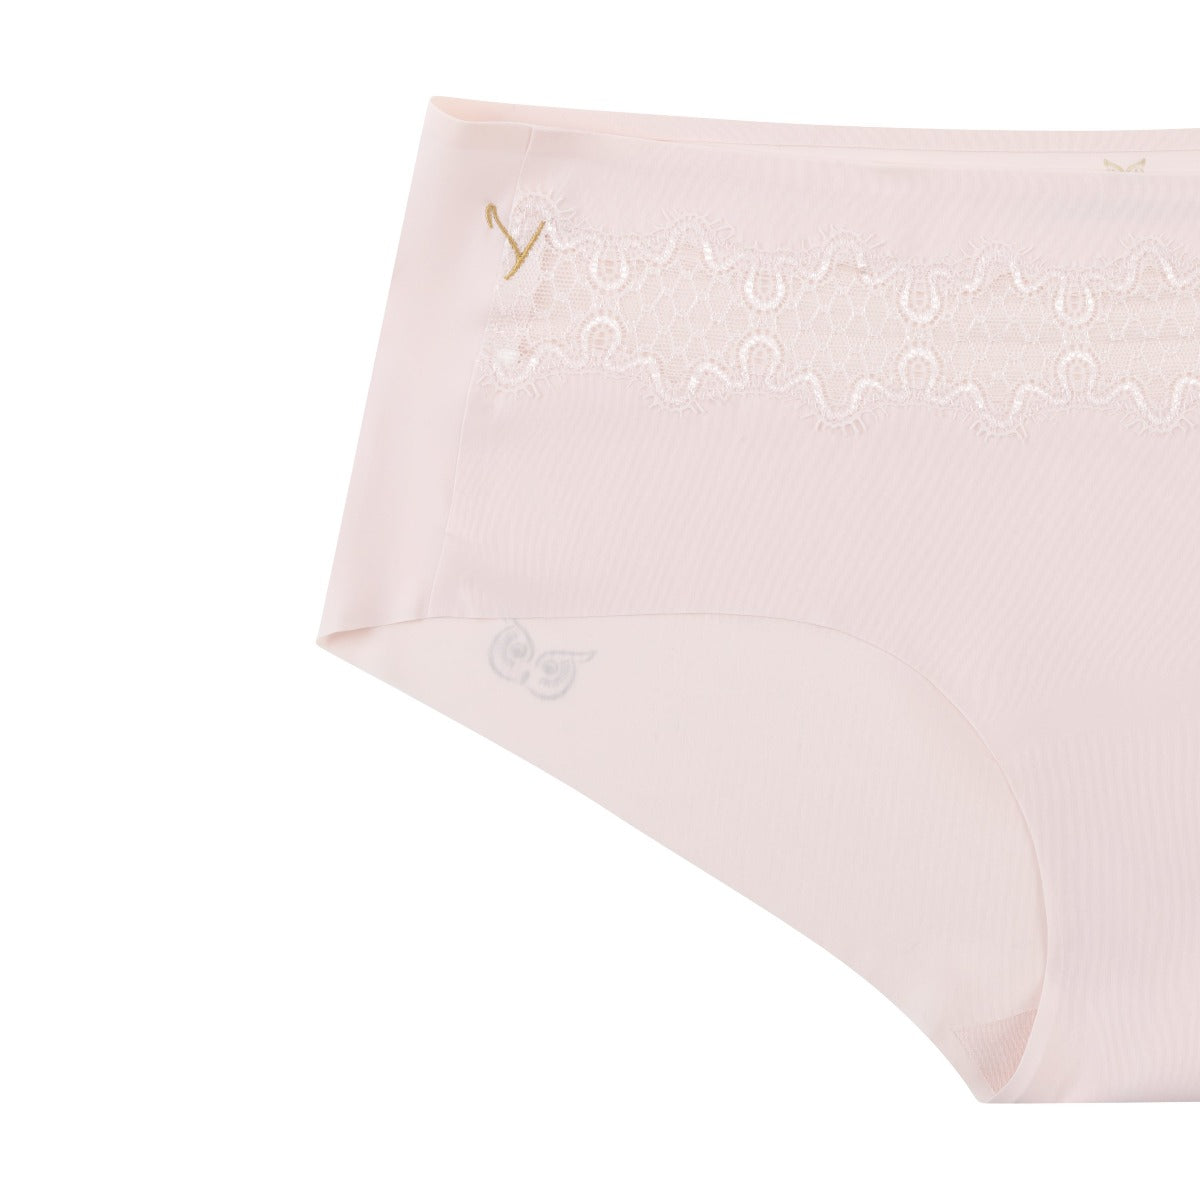 The Best Seamless Underwear that Doesn't Cause a Wedgie – Uwila